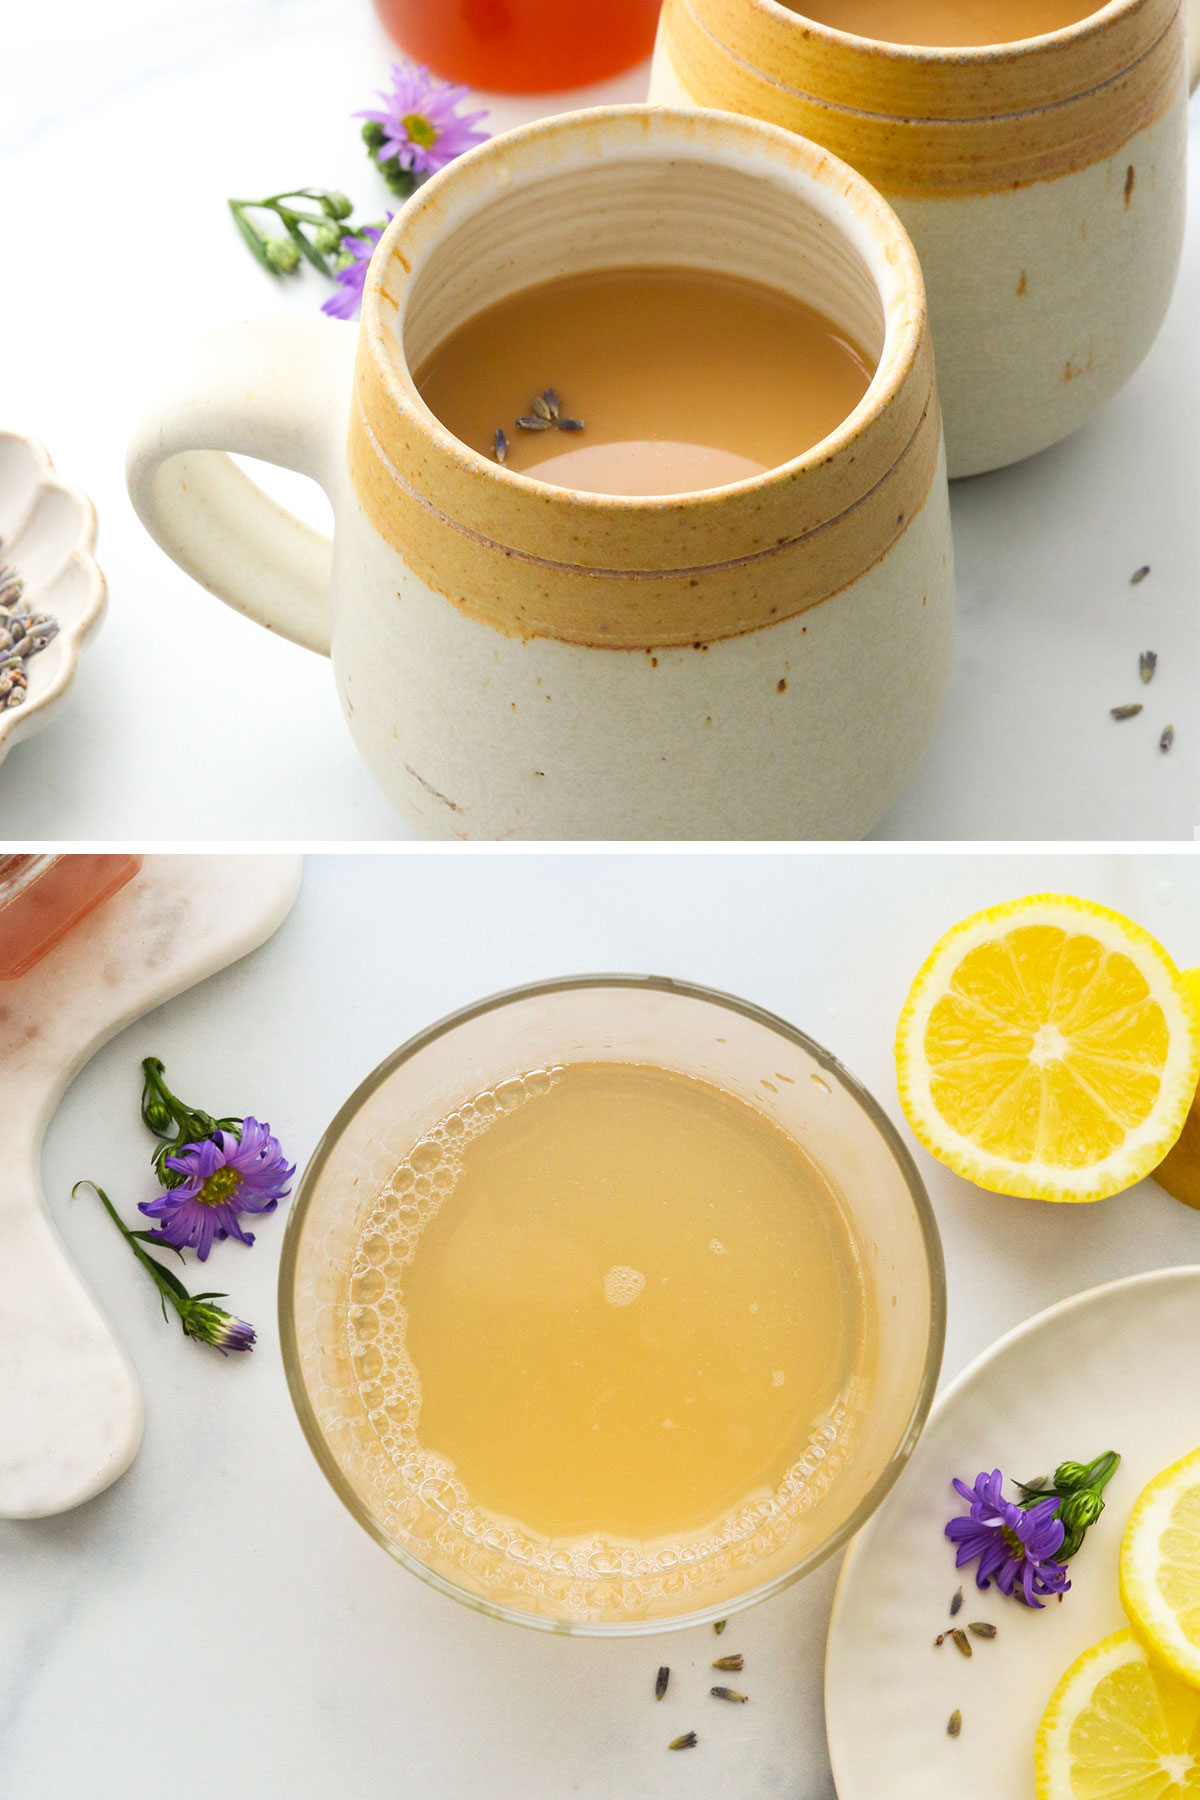 coffee and lemonade drinks using lavender syrup.